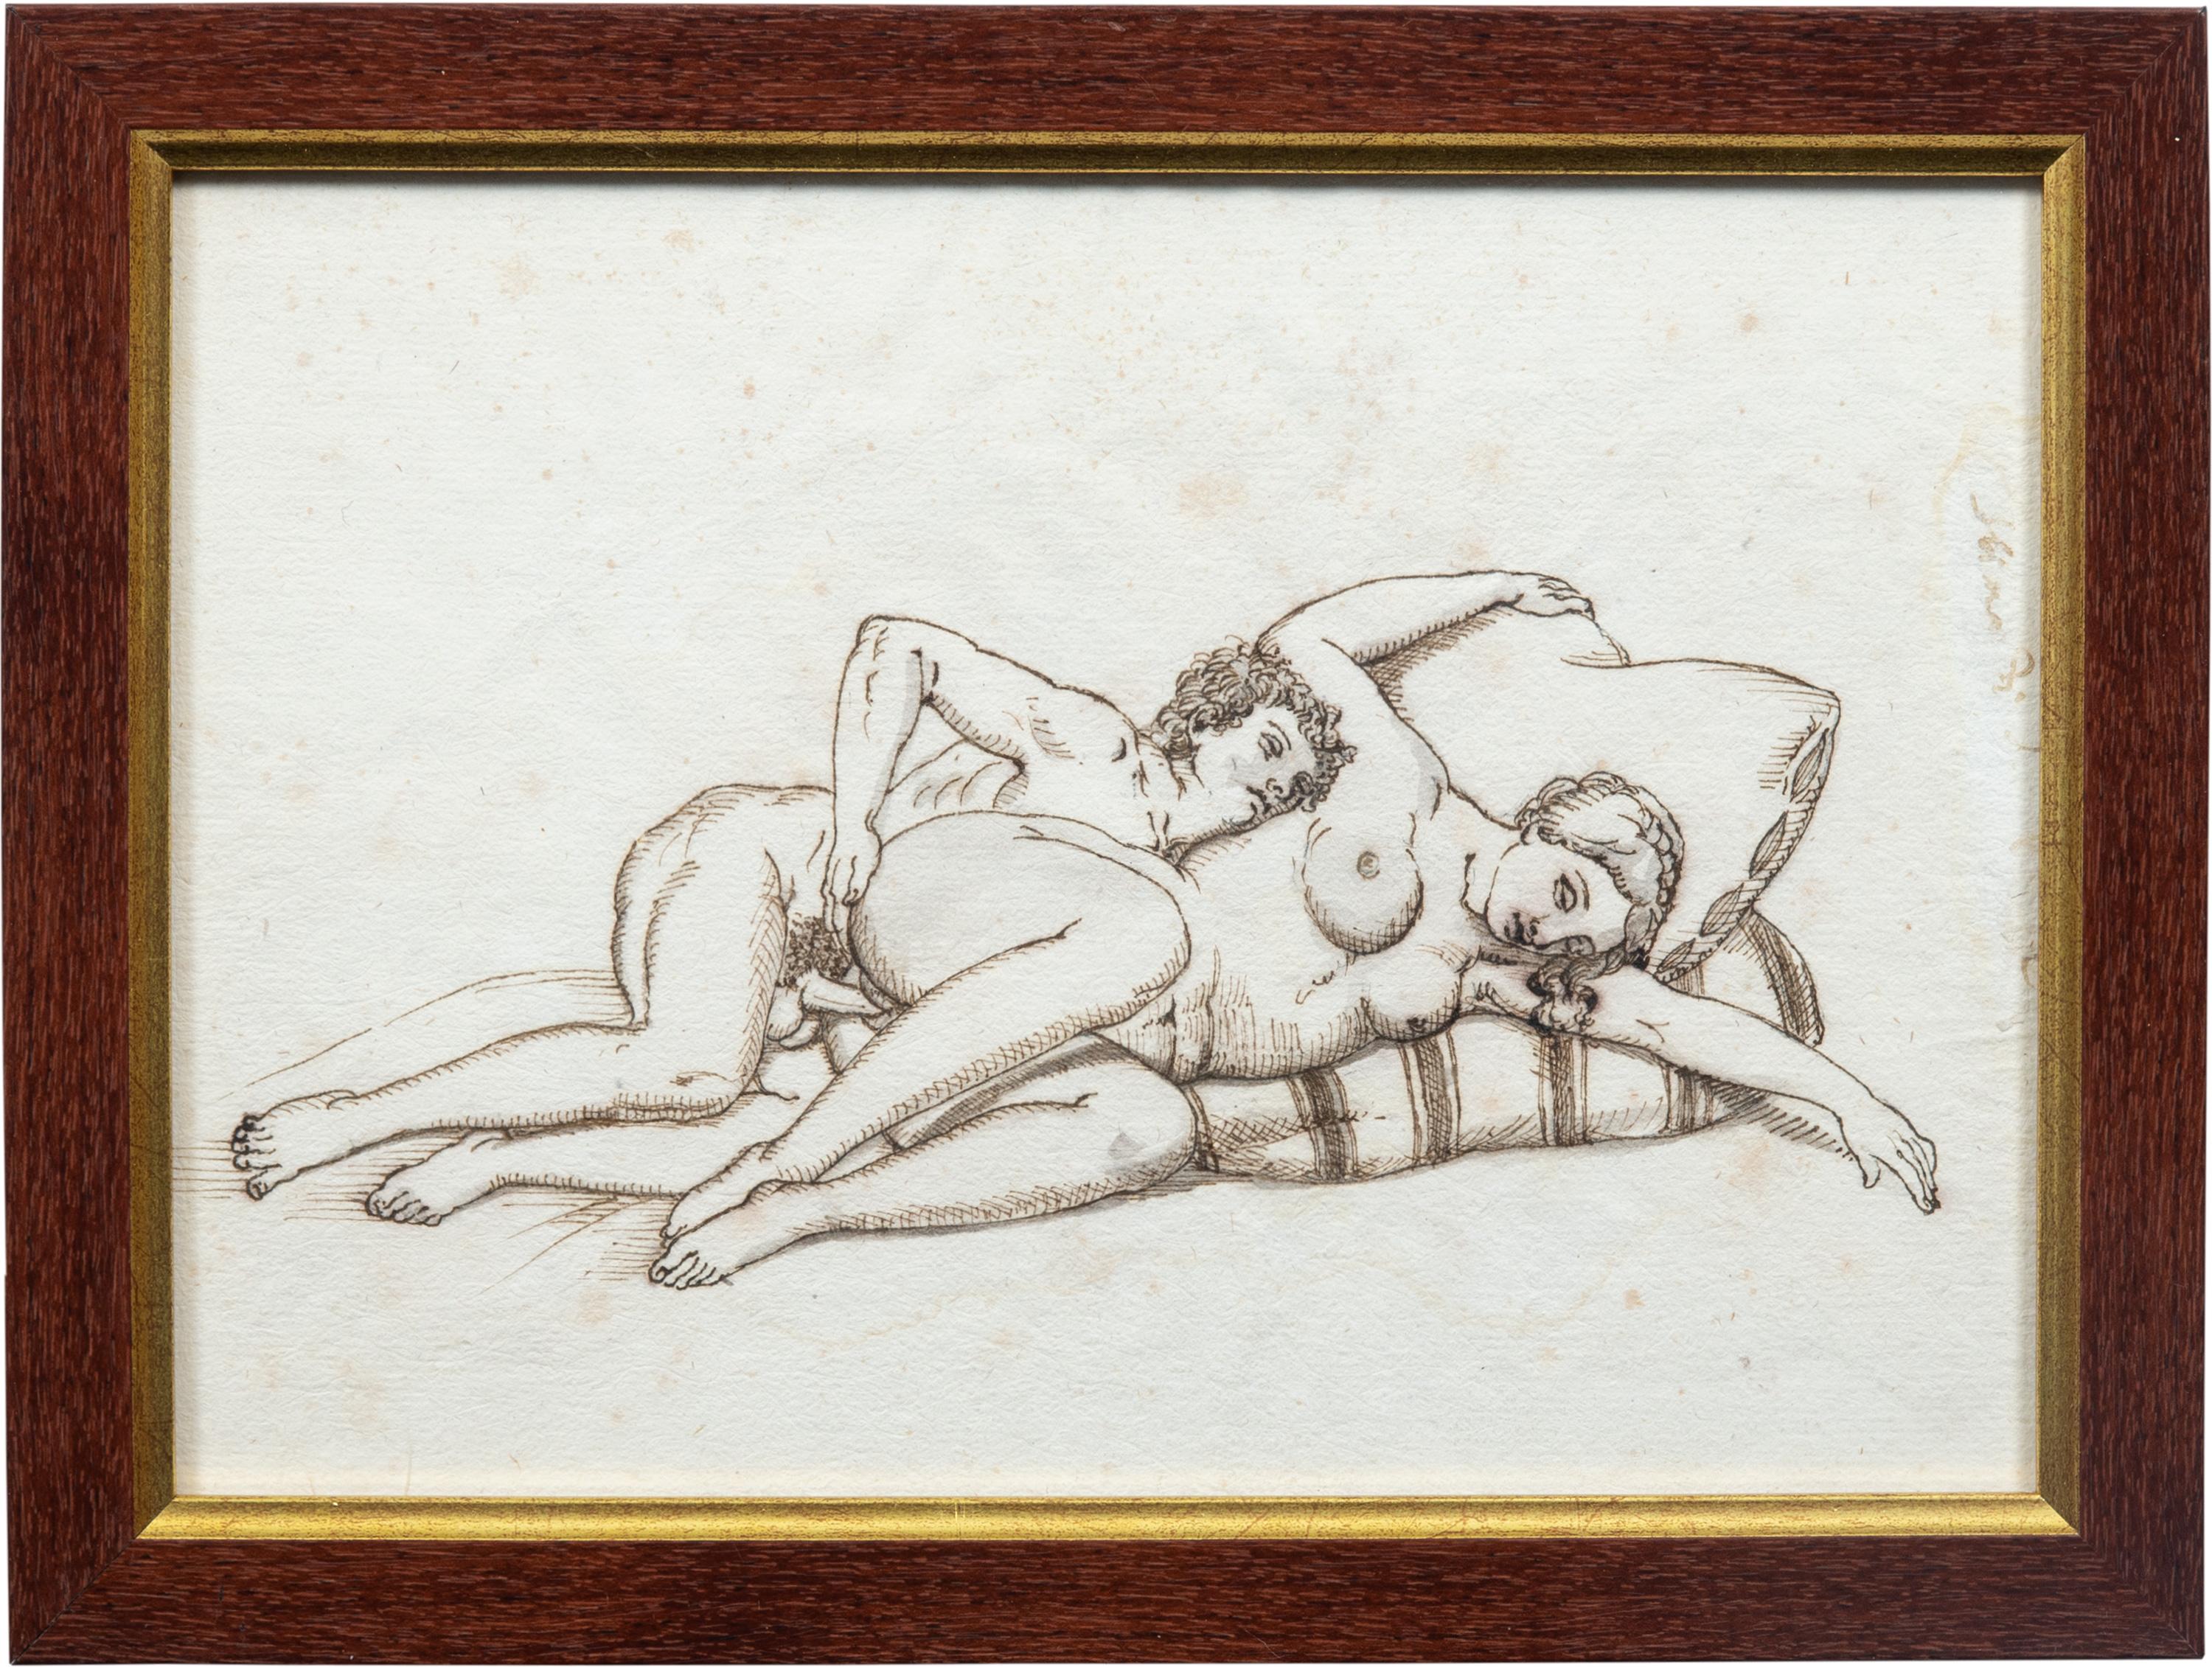 Erotic French painter - 19th century figure drawings - Nudes - Ink on paper For Sale 1